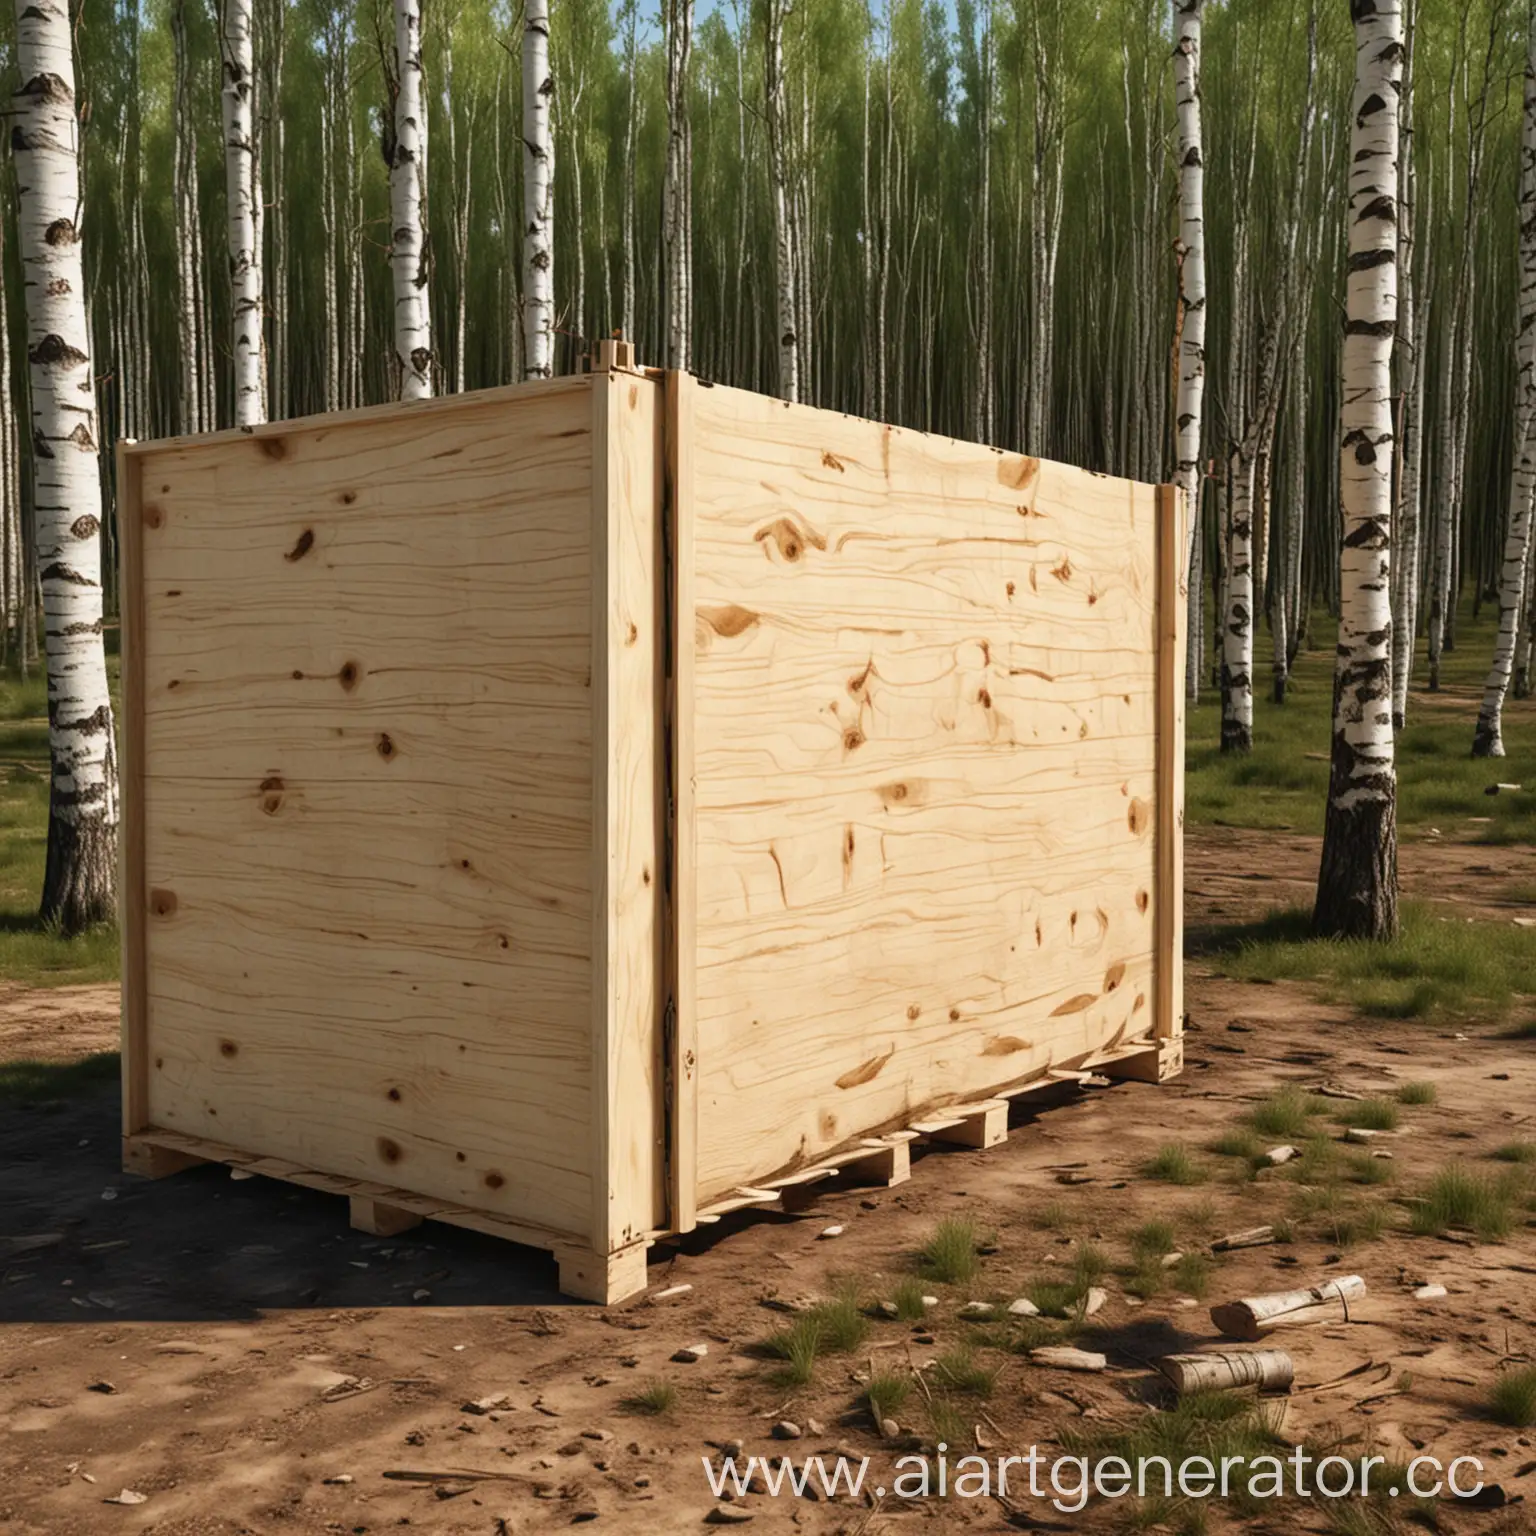 HighQuality-Photorealistic-Plywood-Container-amidst-Birch-Forest